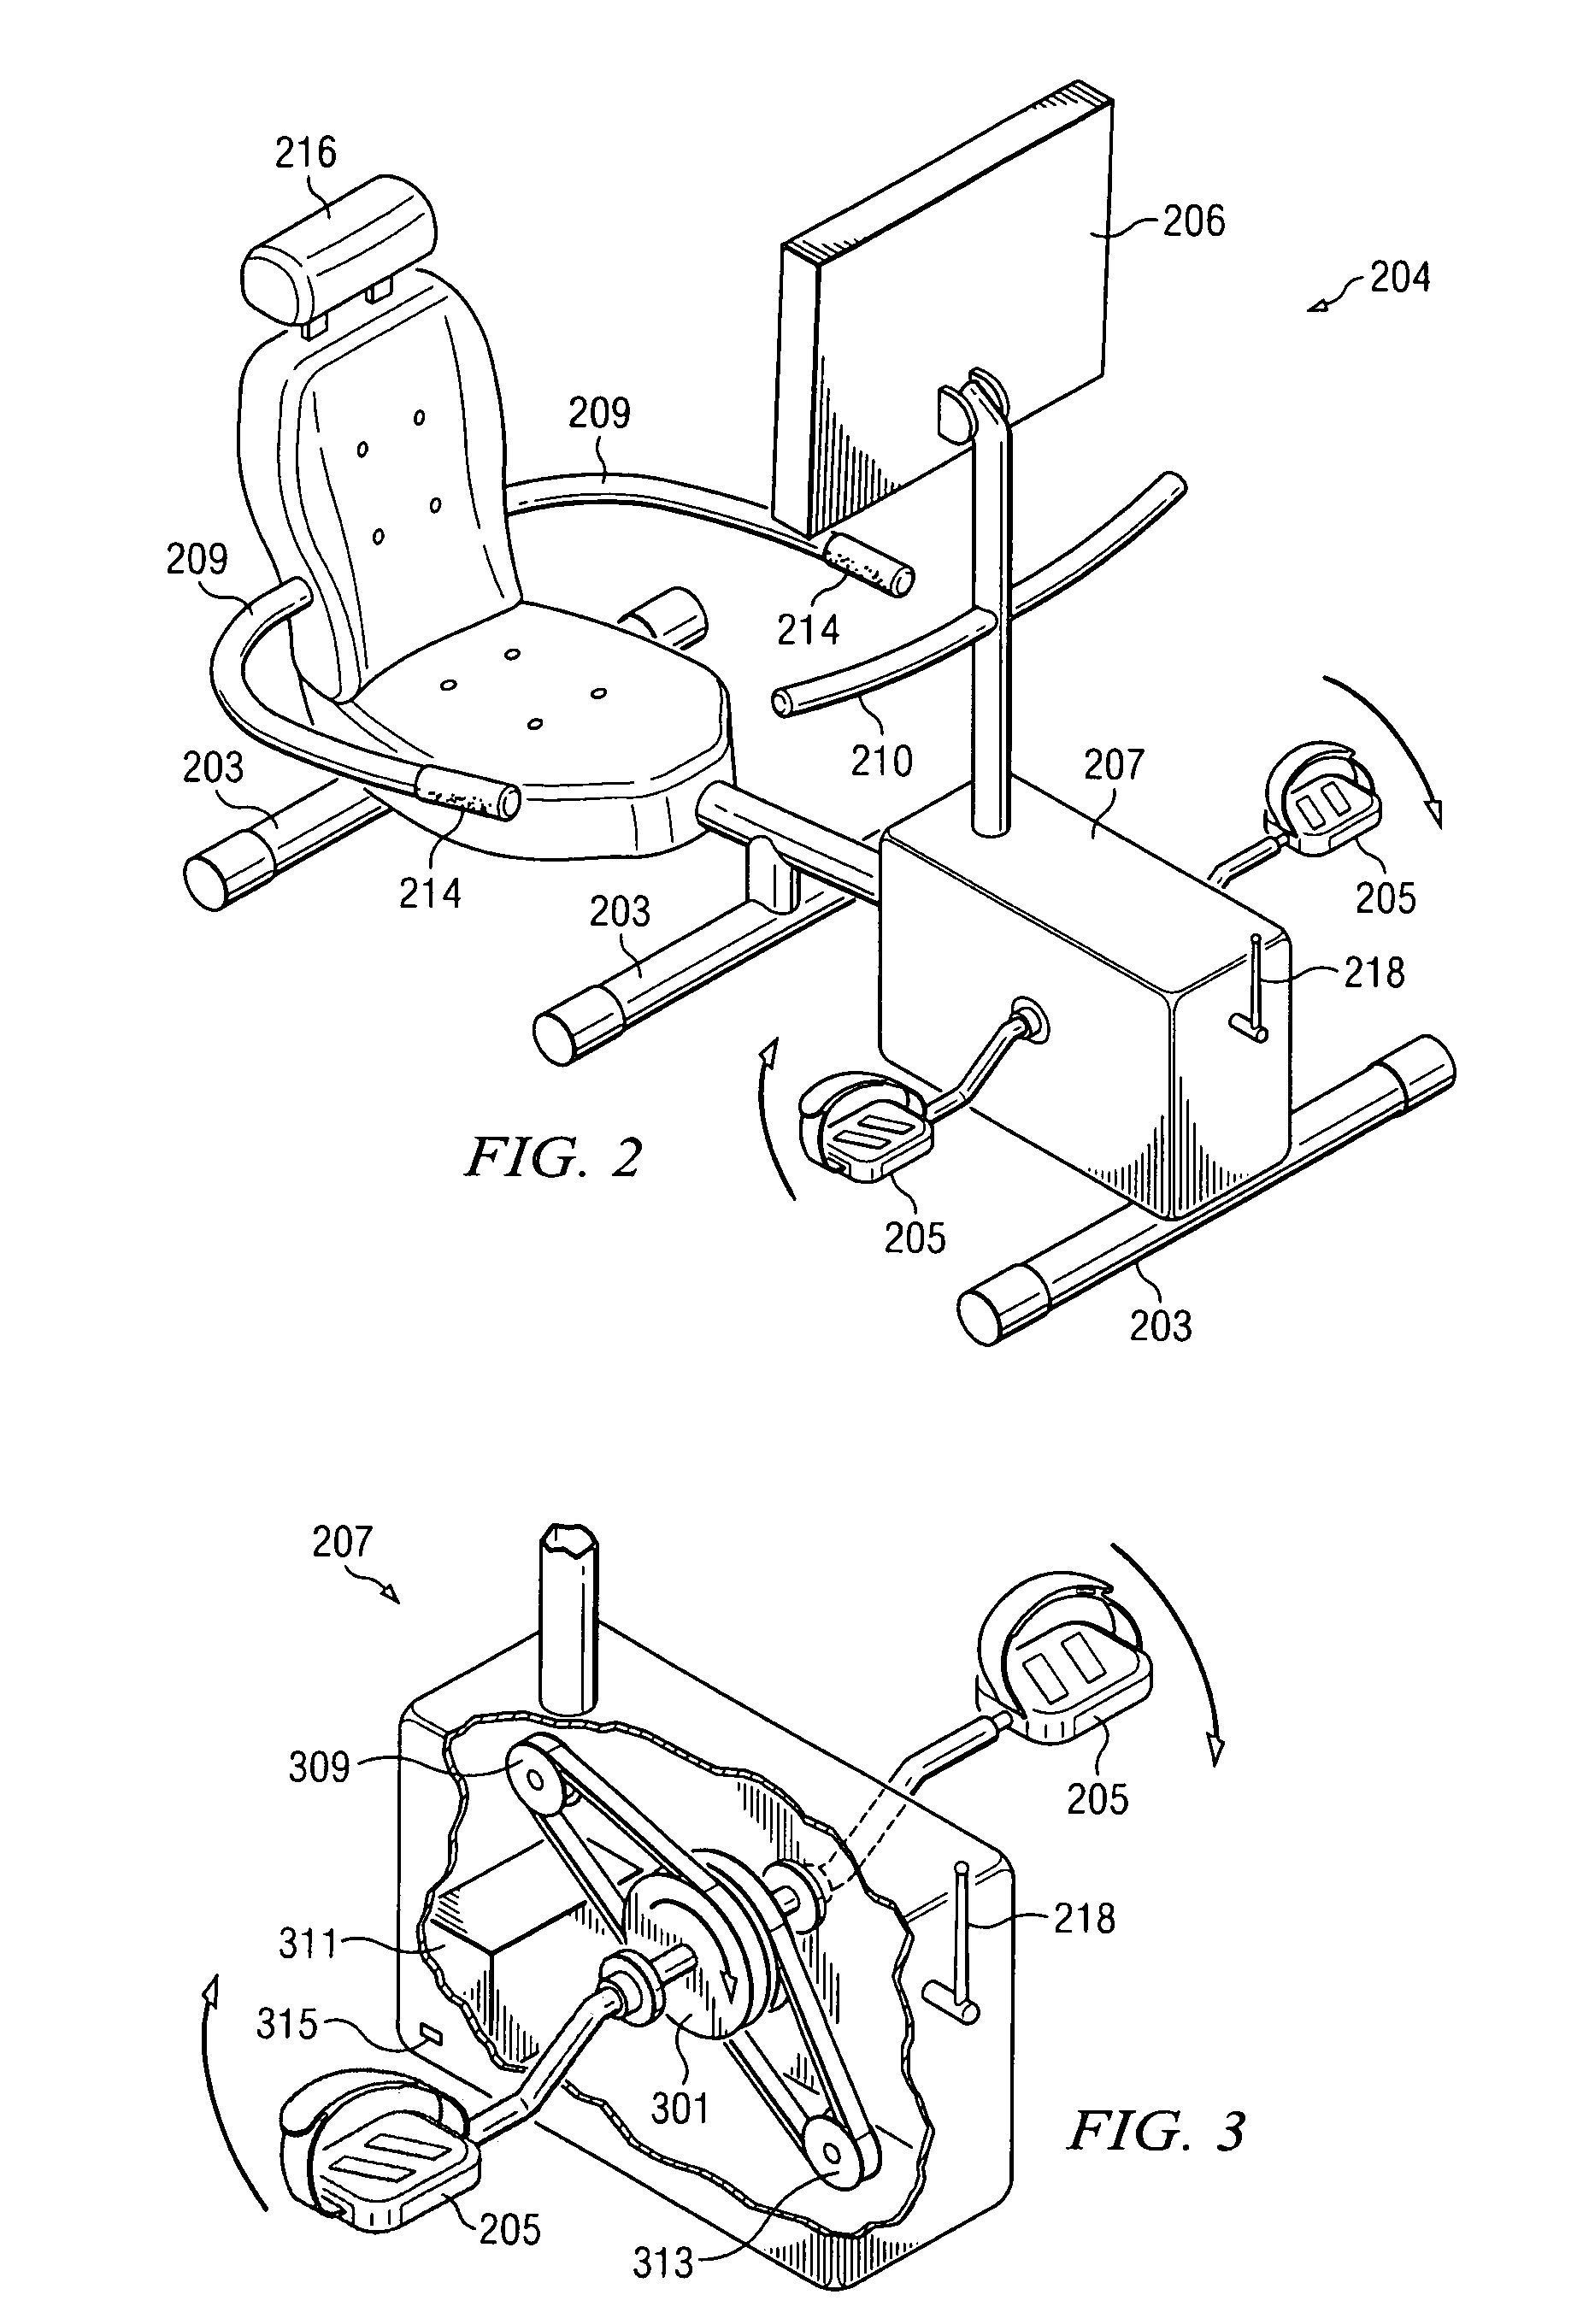 Networked exercise machine